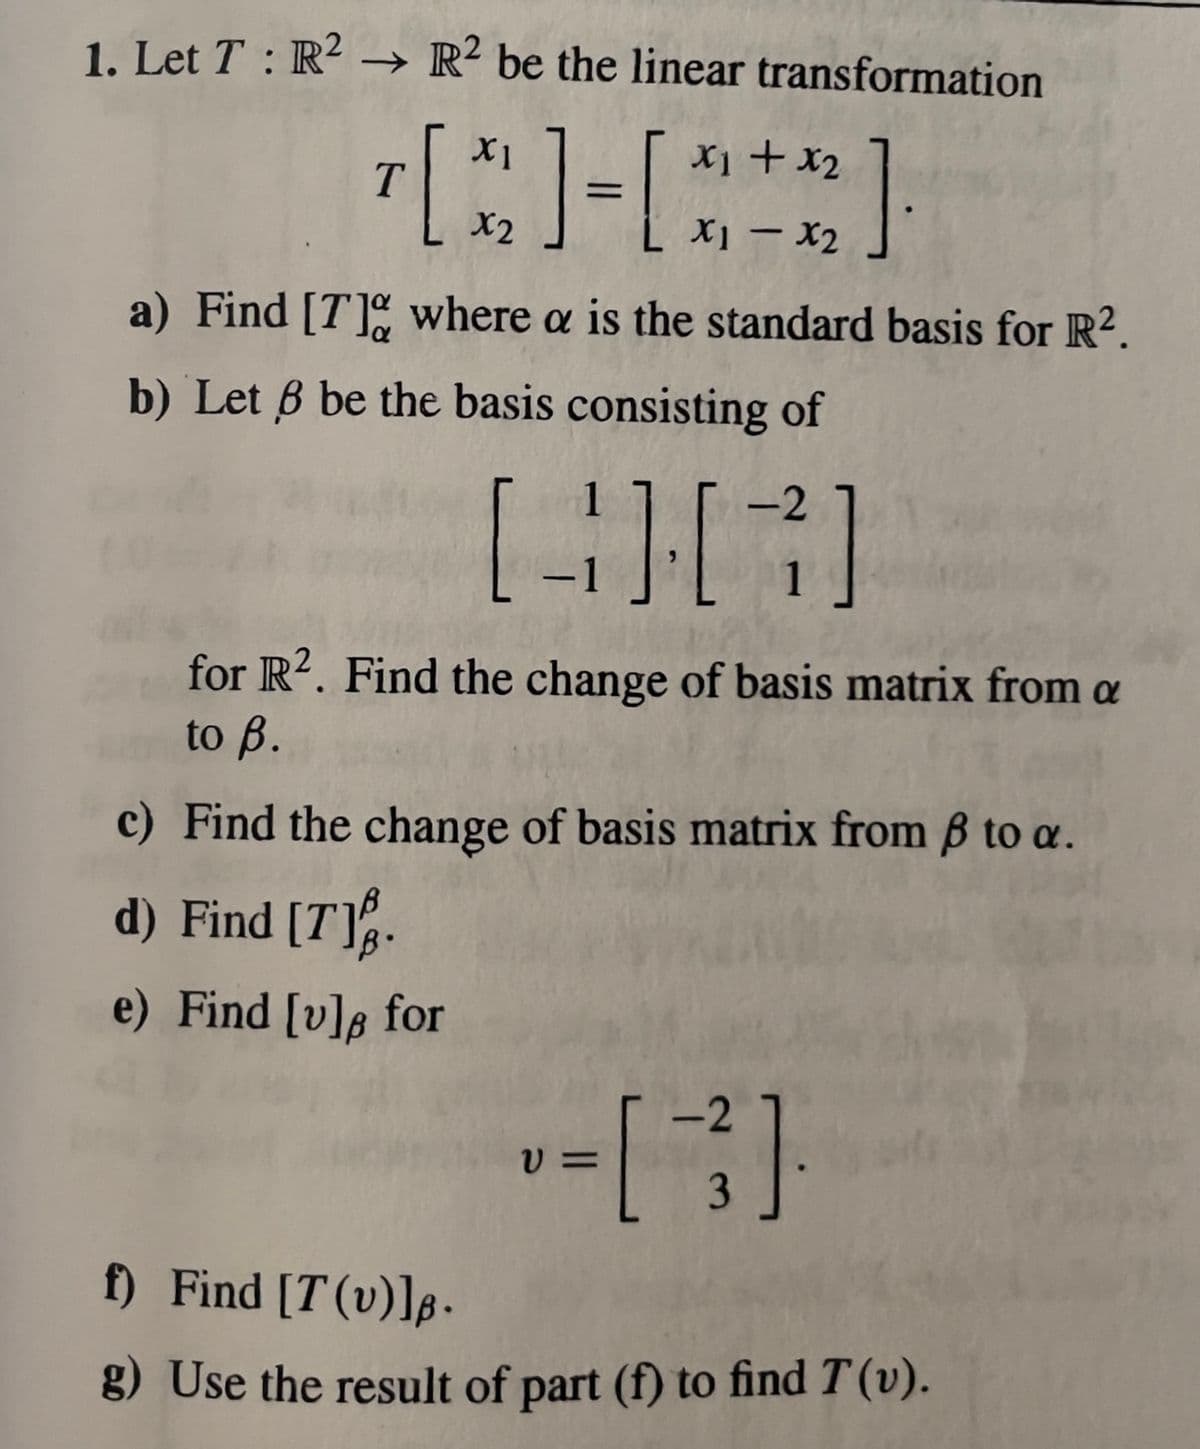 1. Let T: R² → R2 be the linear transformation
+ x₂
[3]-[***]
T
X2
a) Find [7] where a is the standard basis for R².
b) Let 6 be the basis consisting of
1
[3][7]
-1
for R2. Find the change of basis matrix from a
to B.
c) Find the change of basis matrix from ß to a.
d) Find [7].
e) Find [v]s for
V=
<-2
f) Find [T(v)].
g) Use the result of part (f) to find T (v).